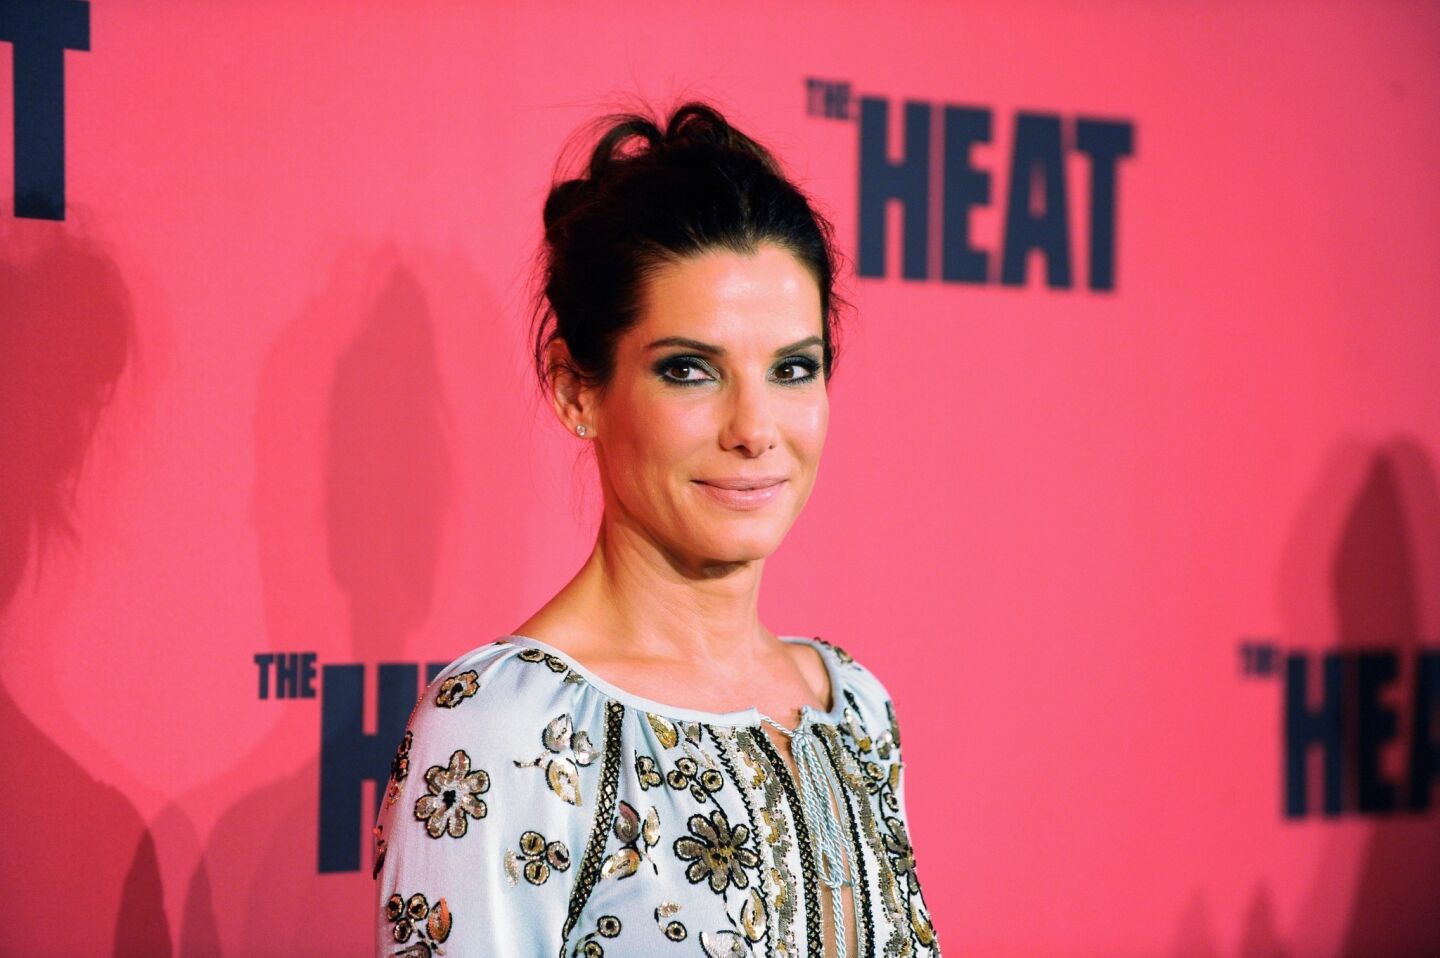 Celeb: Sandra Bullock Company: Fortis Films Select projects: "George Lopez," "Miss Congeniality," "Two Weeks Notice" and "All About Steve"